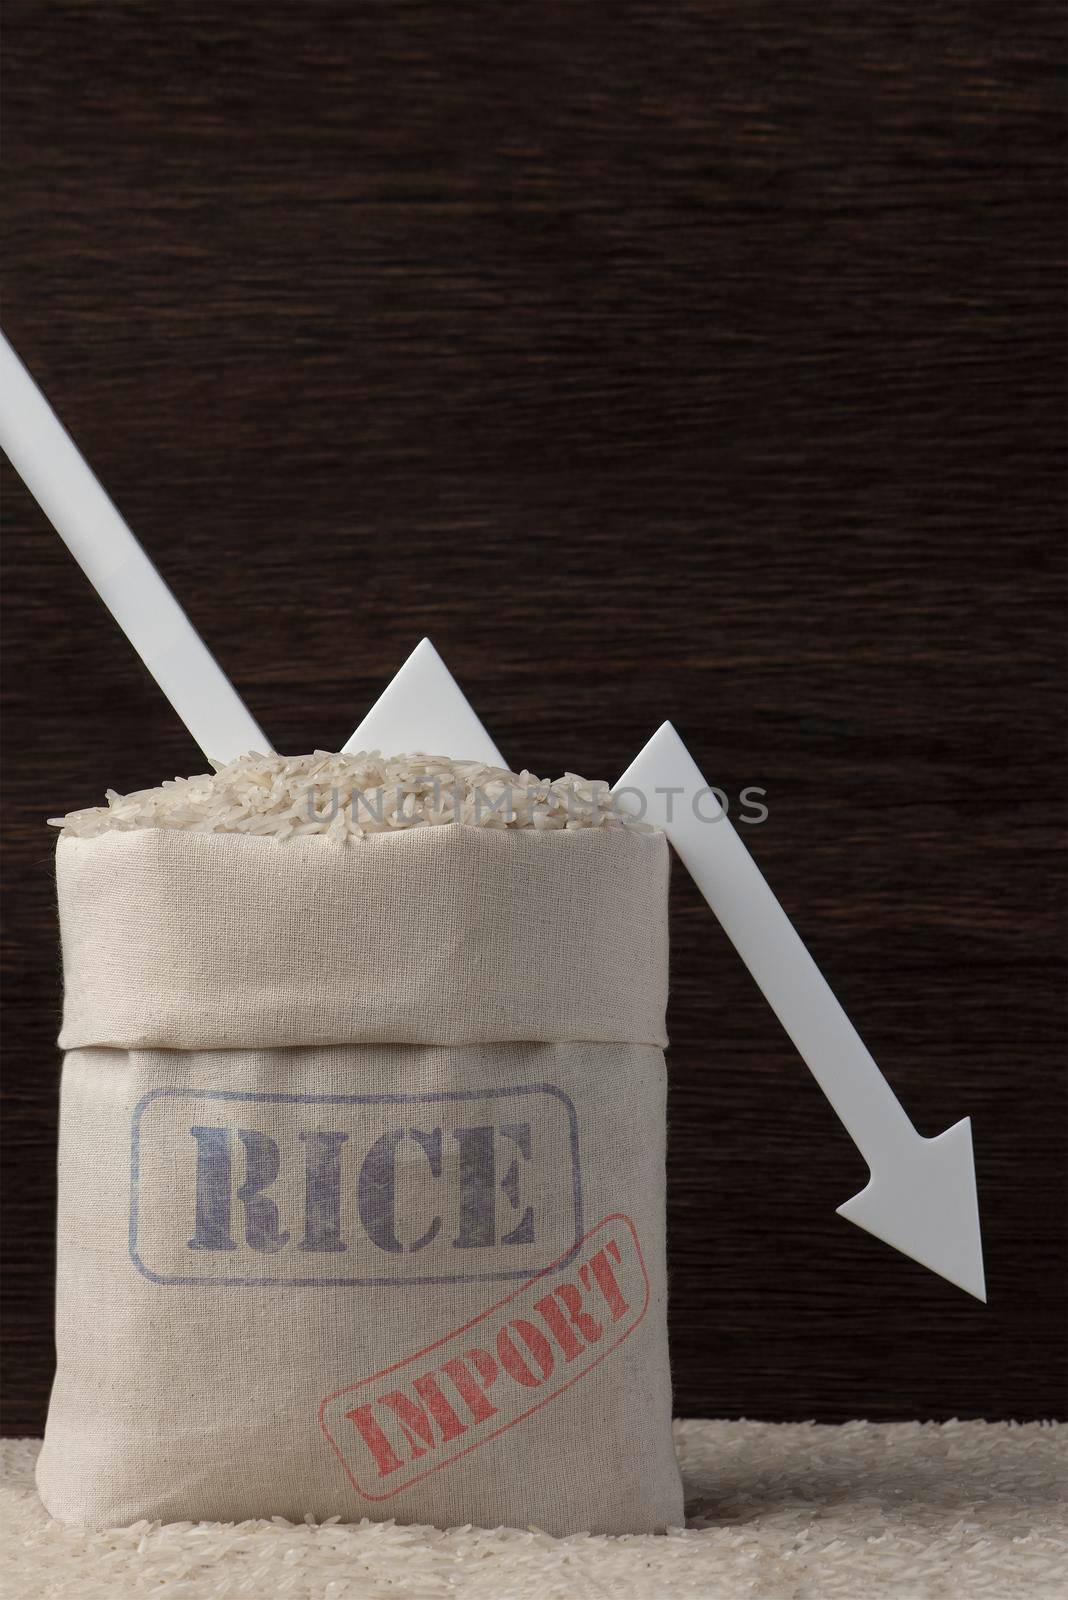 Rice import. Decrease in imports of rice and grain crops. World food crisis. Prohibition of grain and agricultural imports